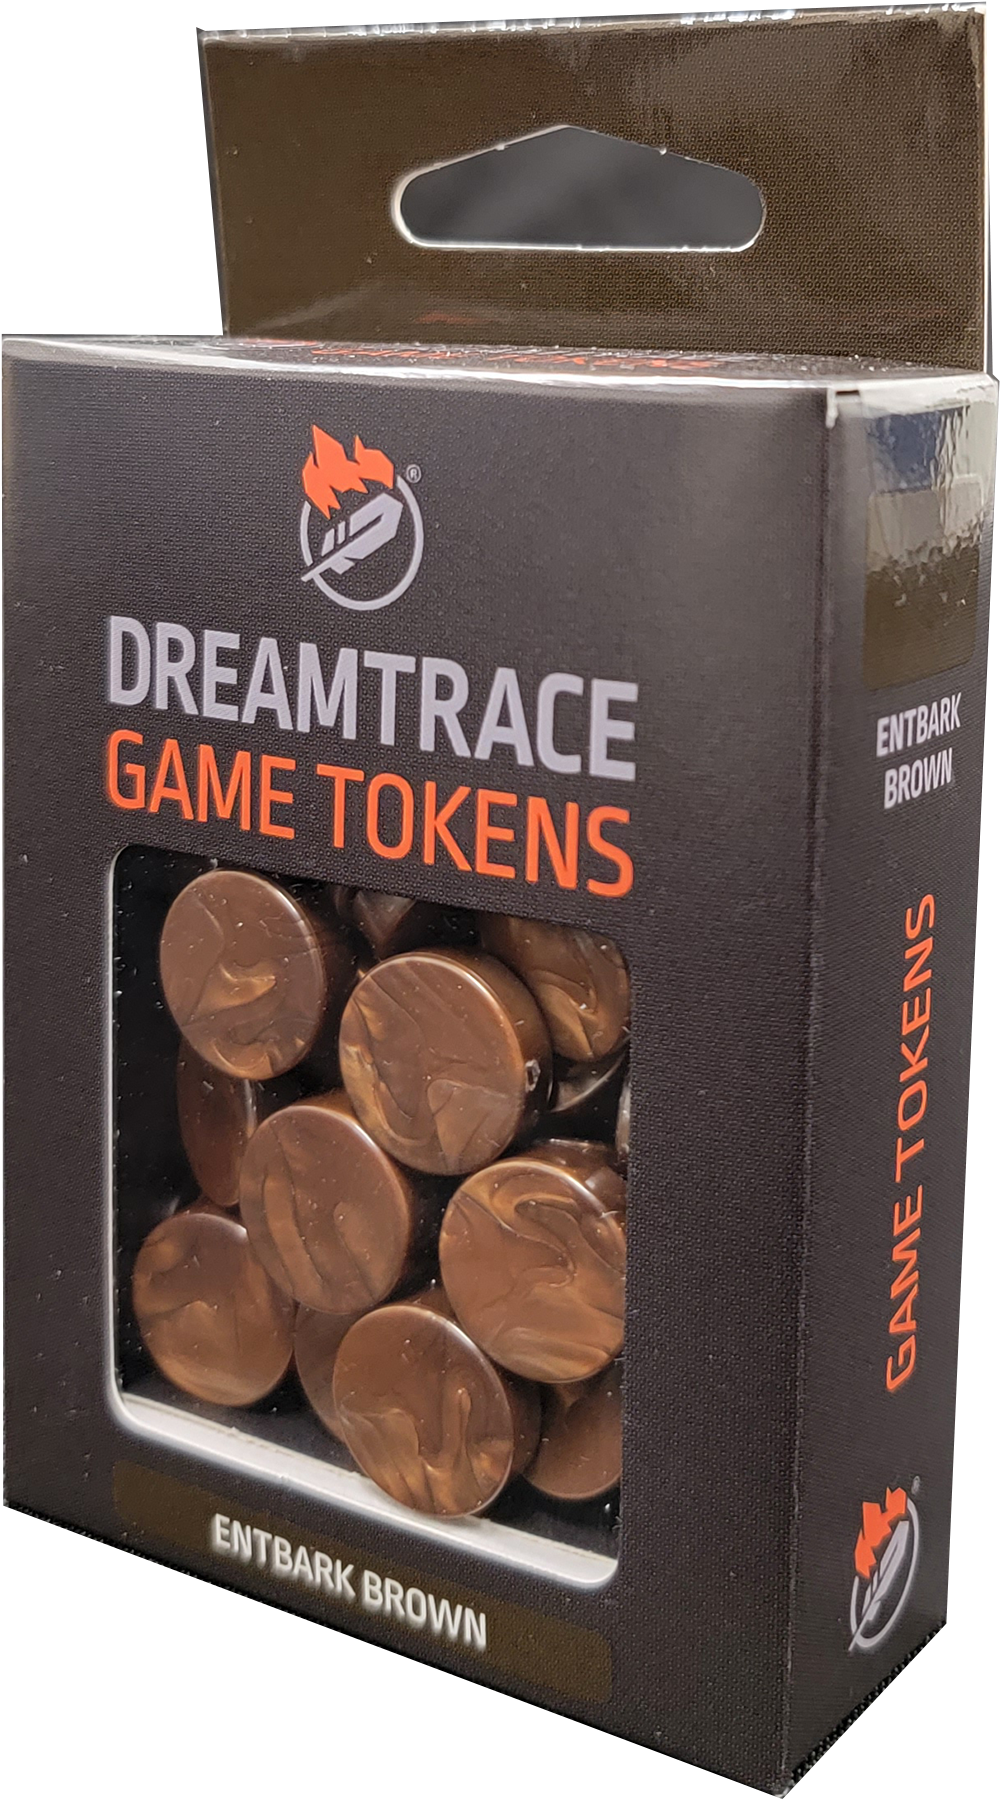 Dreamtrace Gaming Tokens: Entbark Brown 